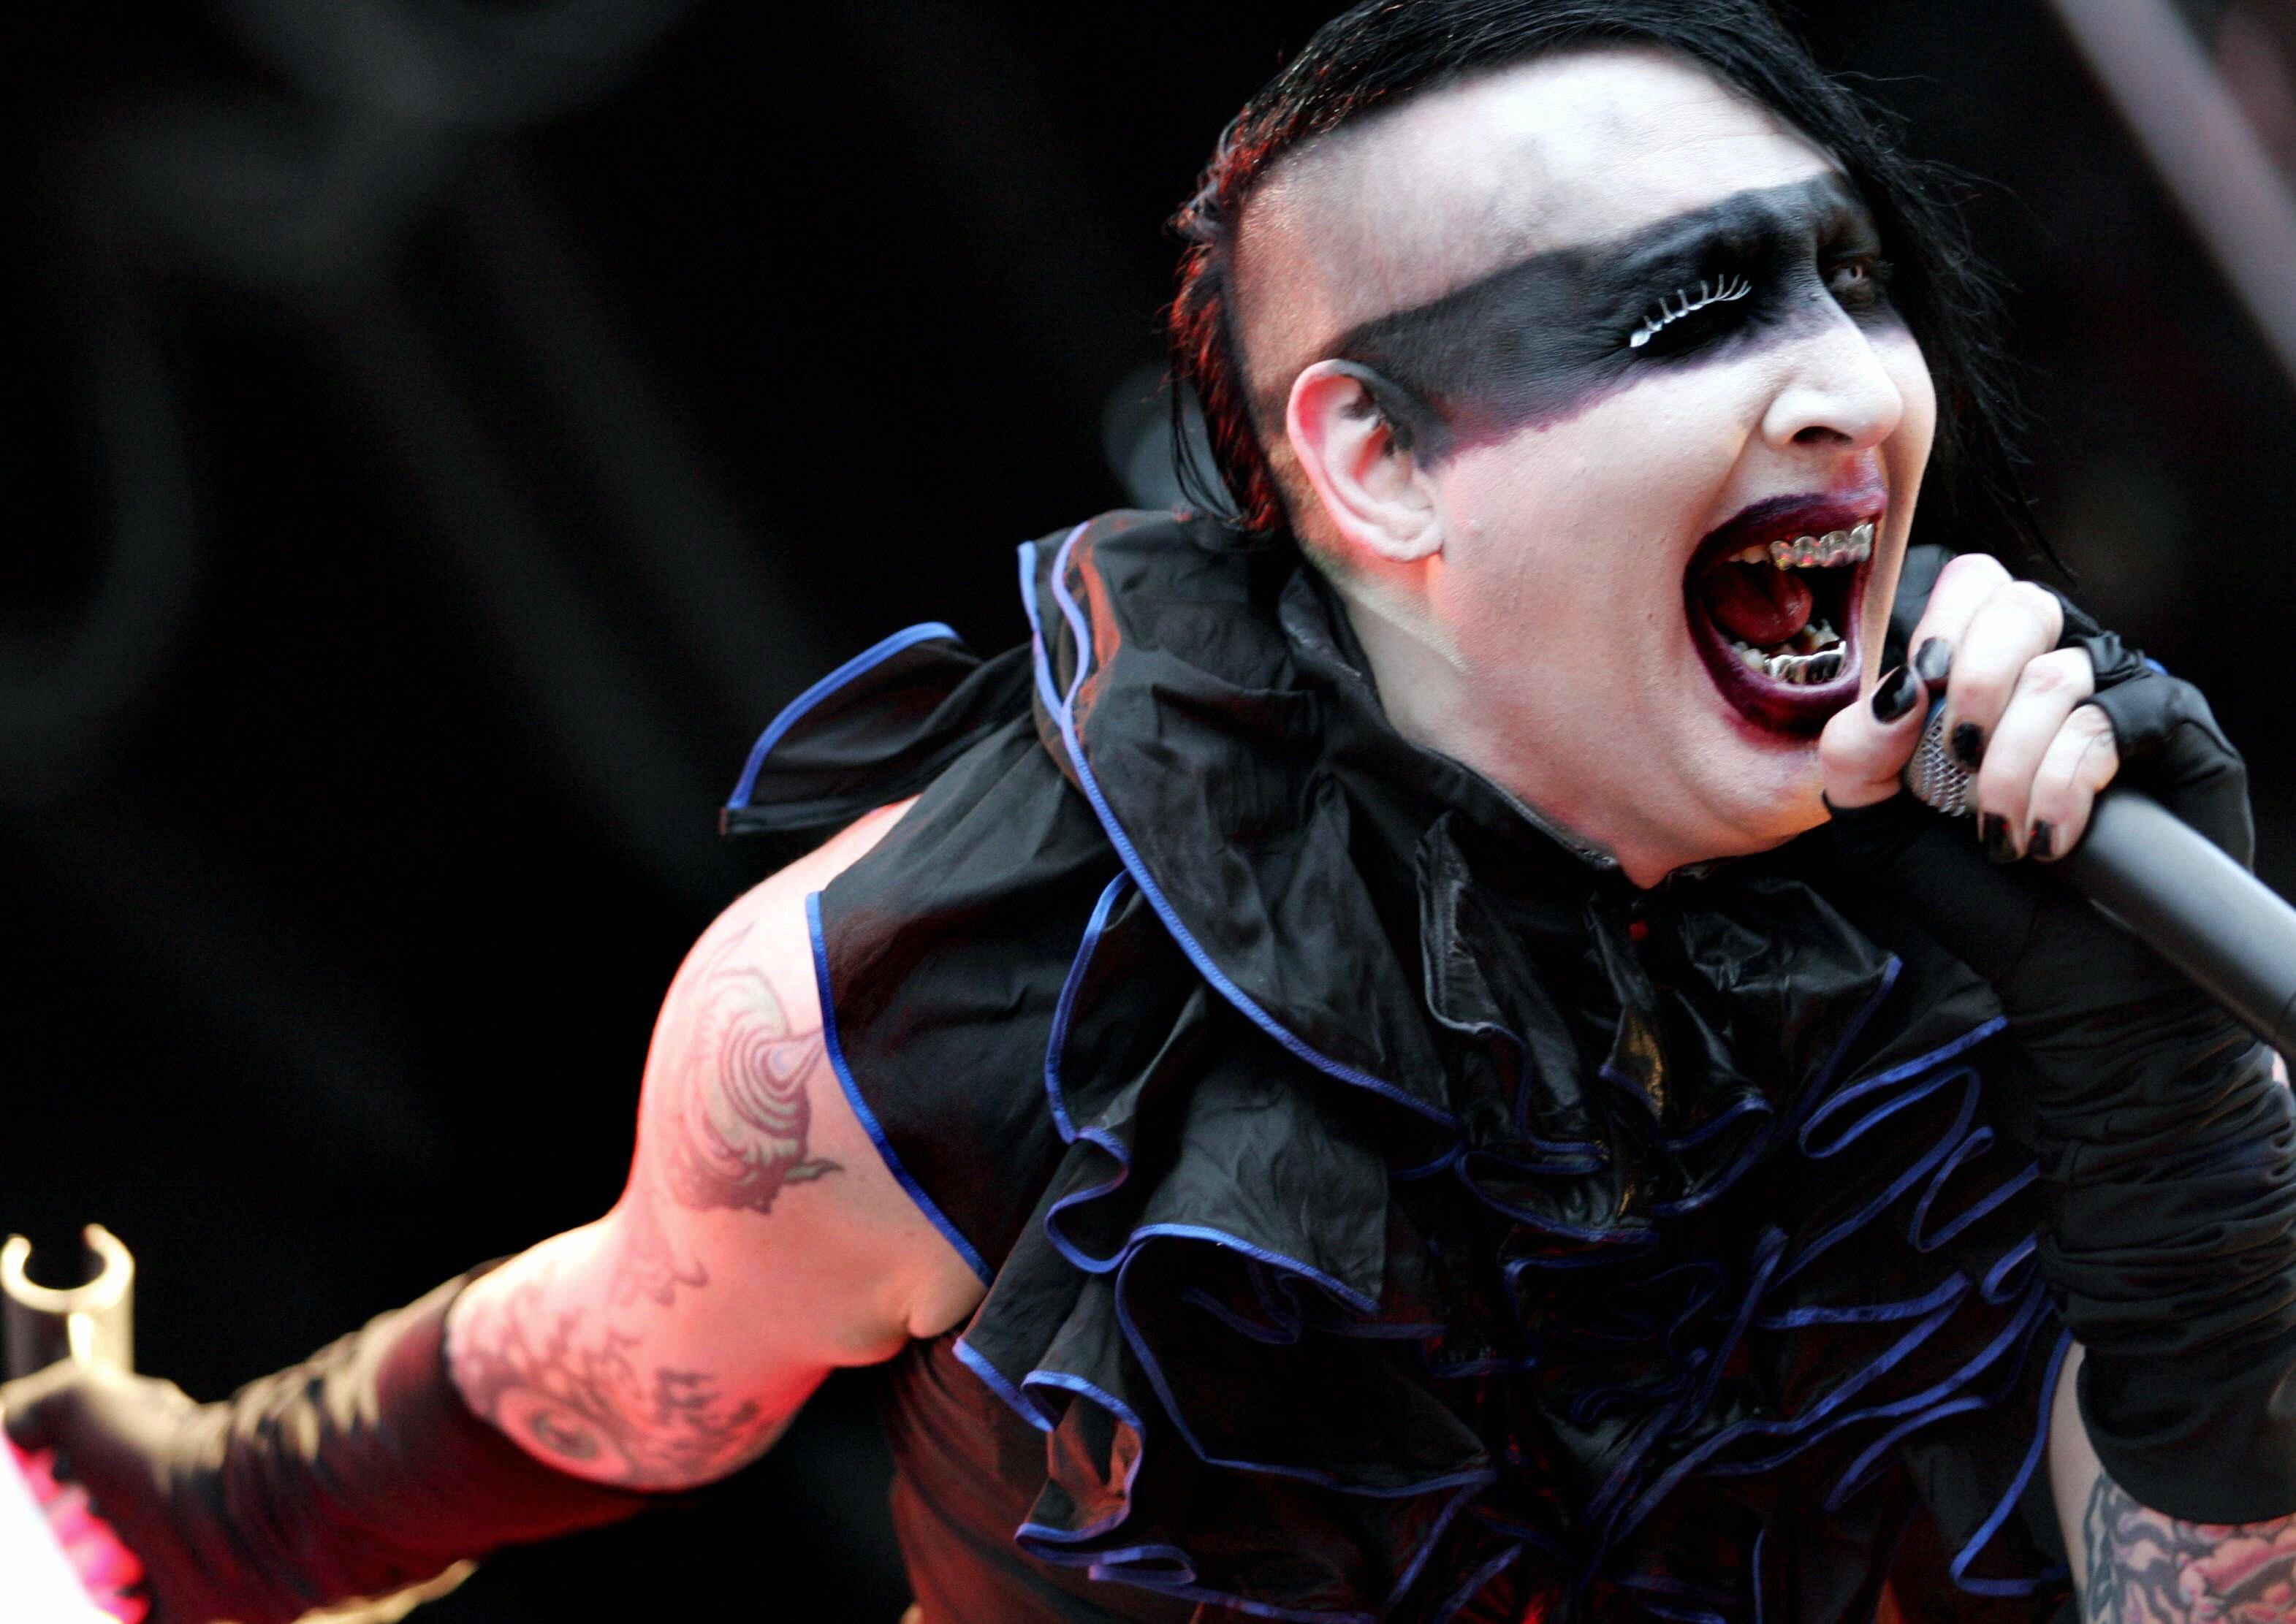 Marilyn Manson Wallpaper Image Photo Picture Background